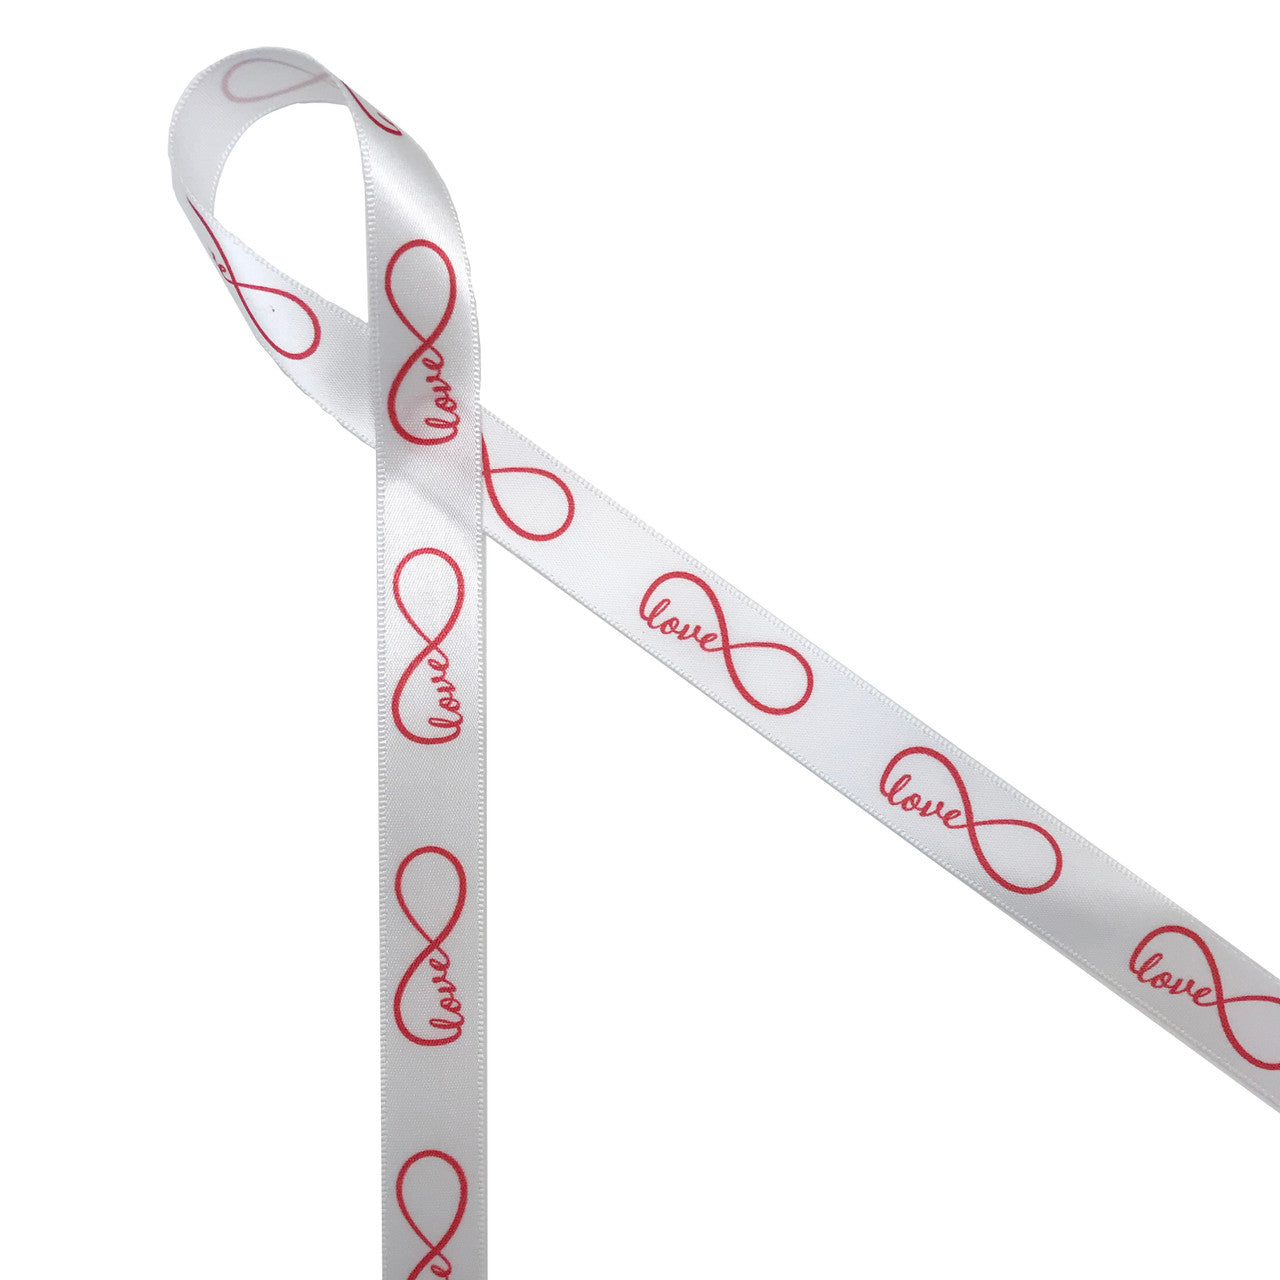 Infinity Love Loop Valentine ribbon in red text printed on 5/8 white satin